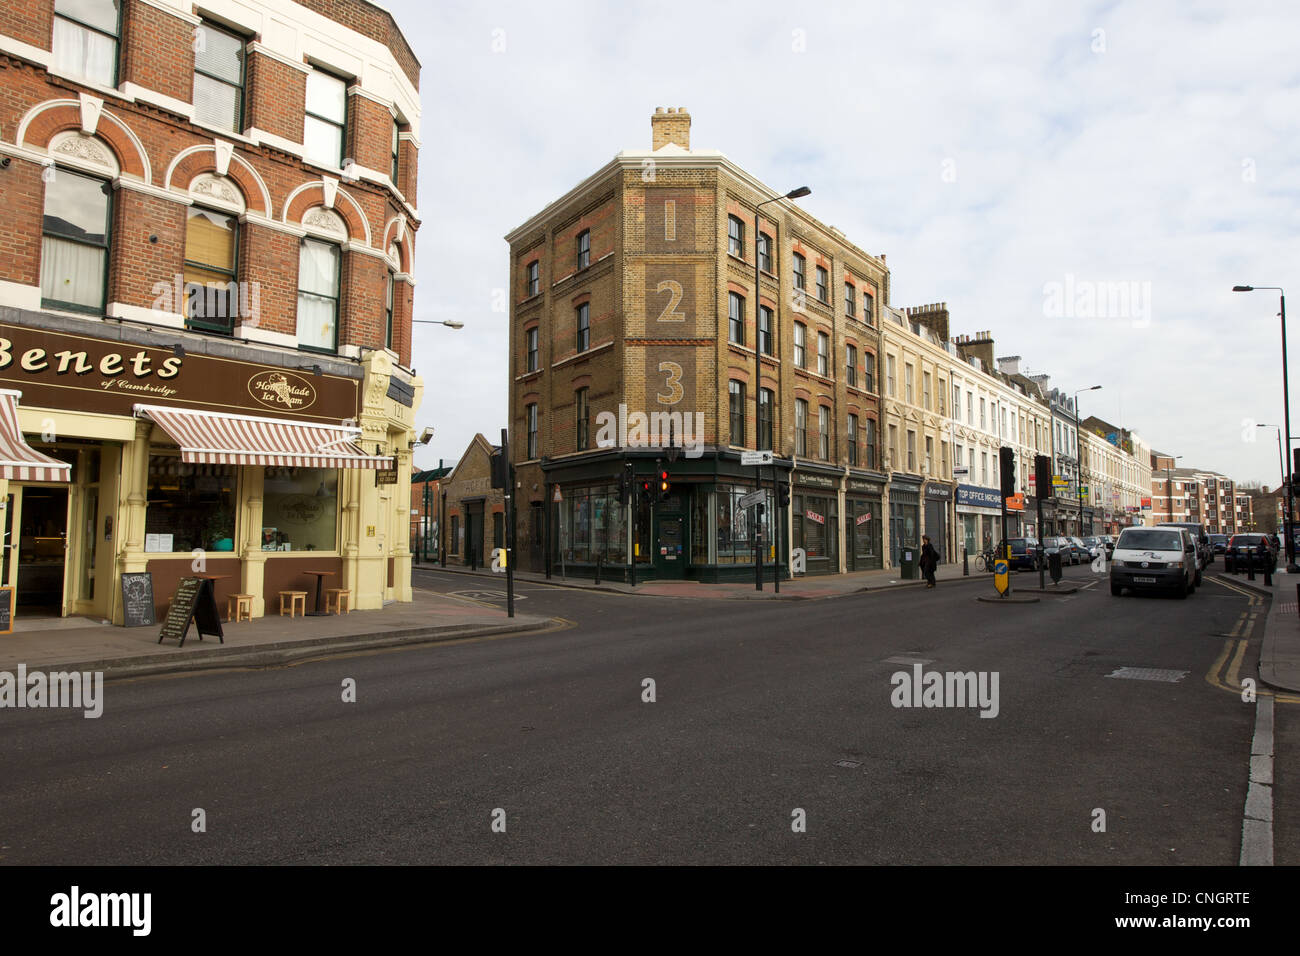 Buildings on Bethnal Green Road in east London, England. Stock Photo